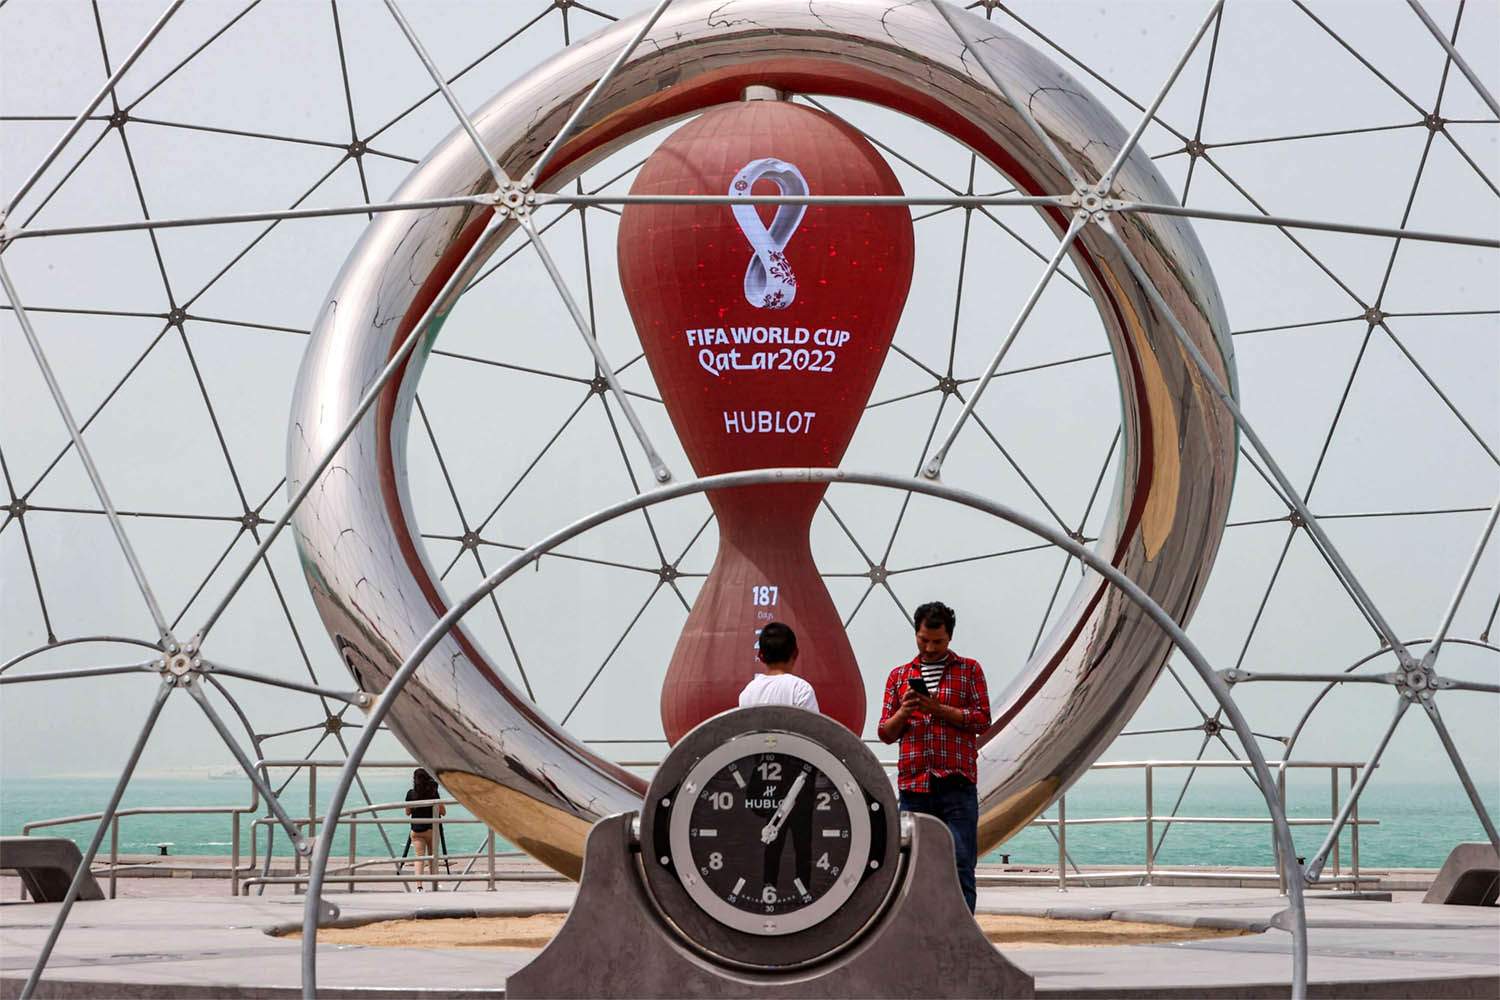 Qatar will only let football fans with match tickets enter the Gulf state during the World Cup tournament